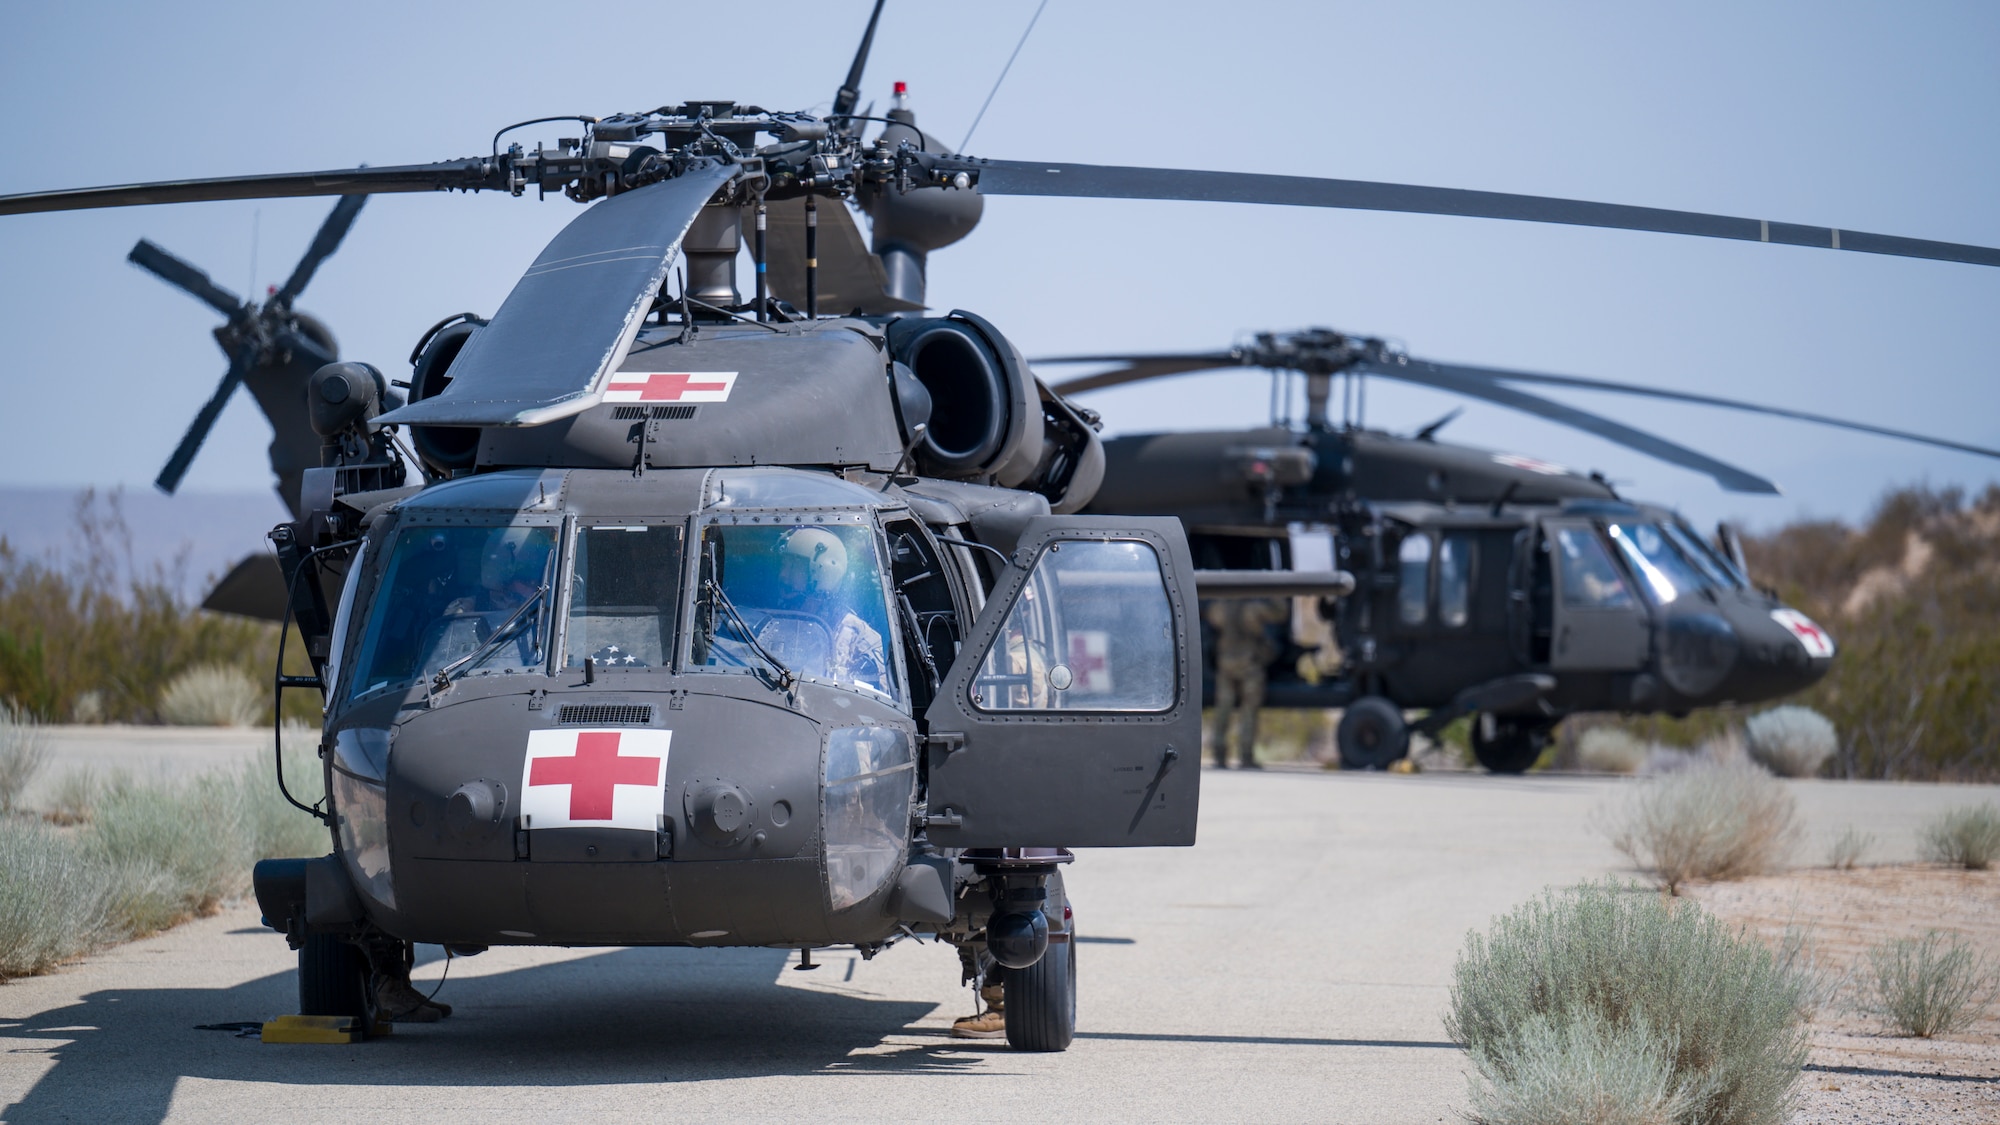 Two UH-60 Blackhawks from C Company, "Desert Dustoff," 2916th Aviation Battalion, 916th Support Brigade, out of Fort Irwin, prepare to depart from the base clinic's helipad following air medevac training at Edwards Air Force Base, California, July 15. Team Edwards medical personnel were trained on proper patient loading procedures and were then given familiarization flights around the medical facility. (Air Force photo by Giancarlo Casem)